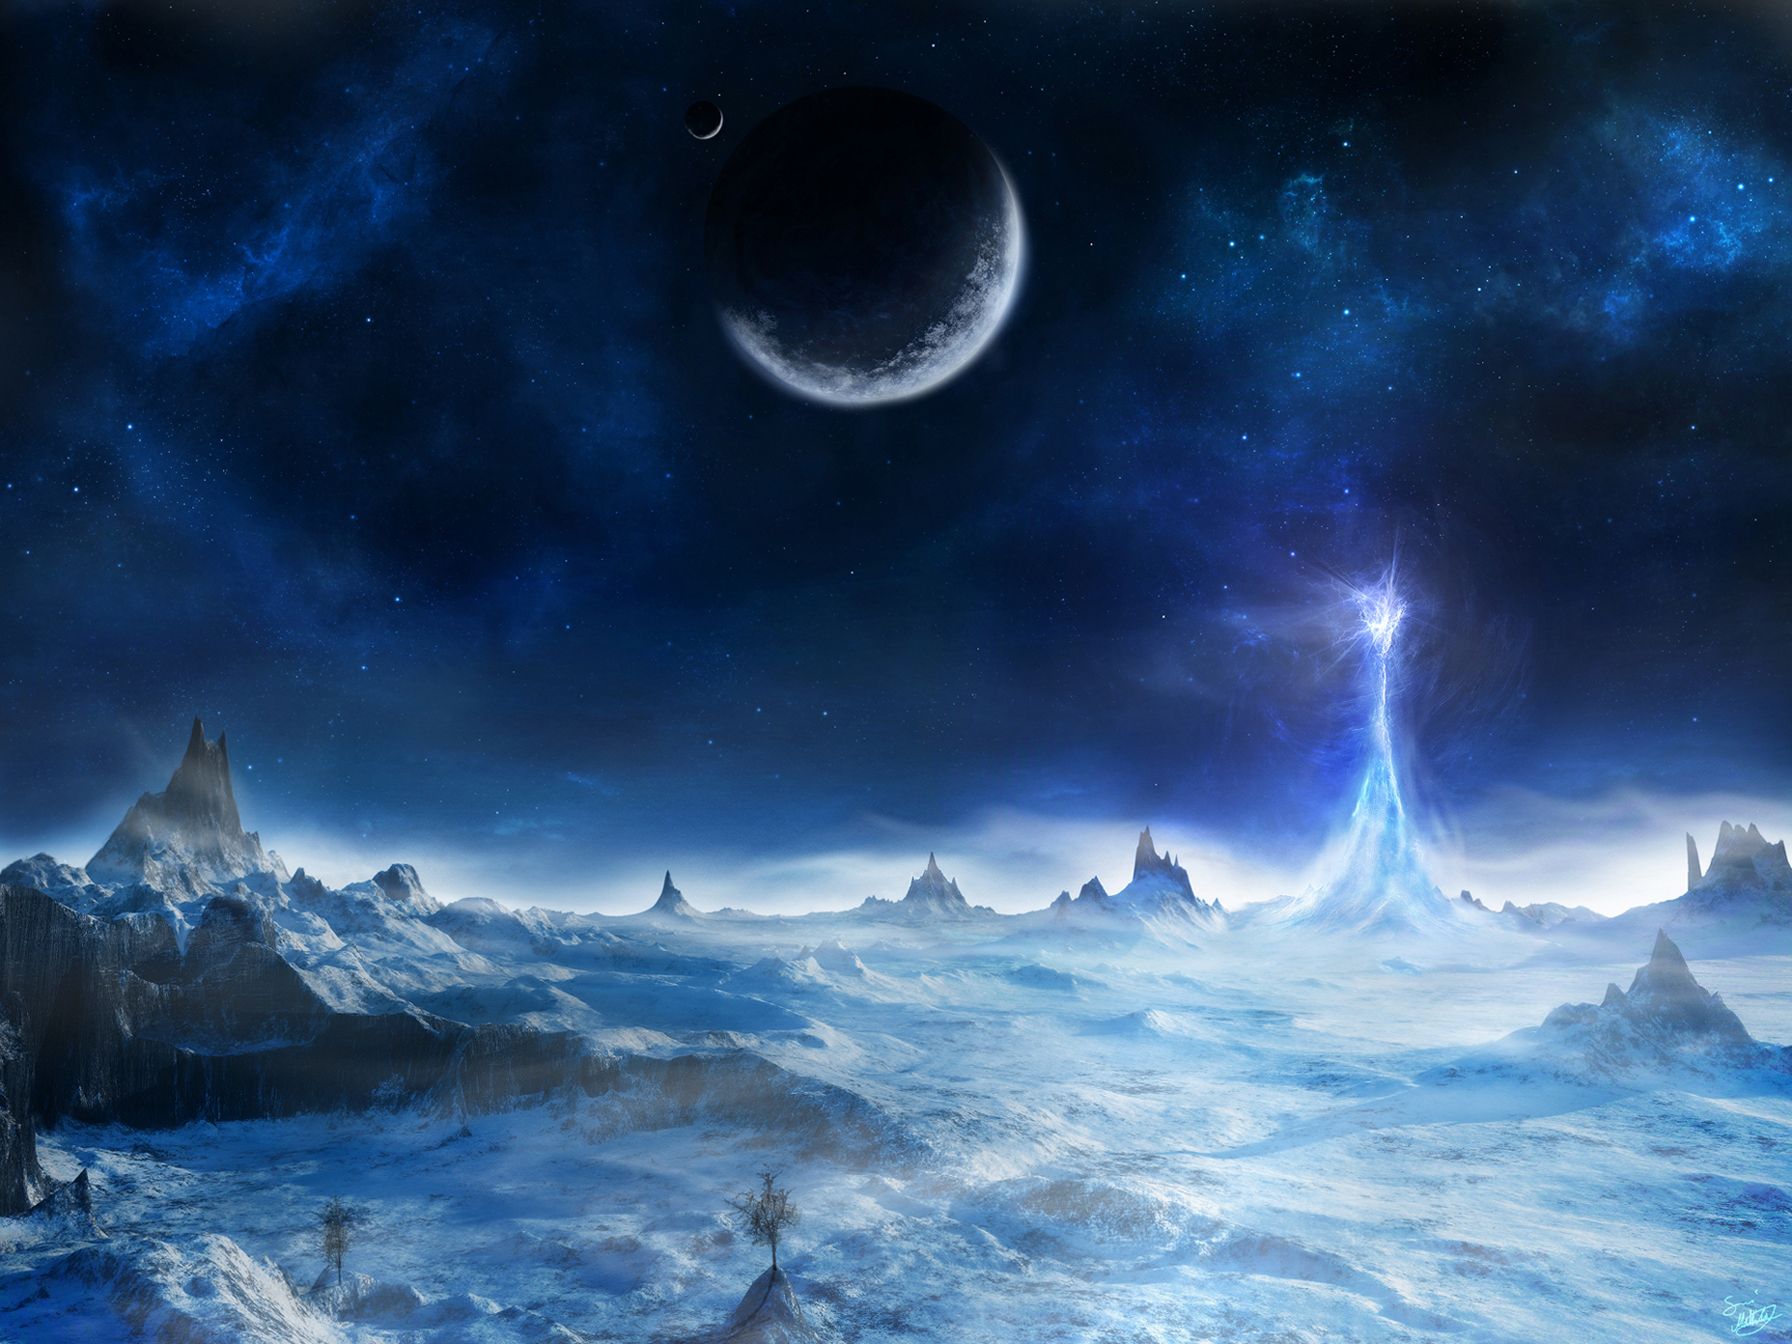 Full HD Wallpapers + Space, Blue, Ice, Planets, Landscapes, by ...